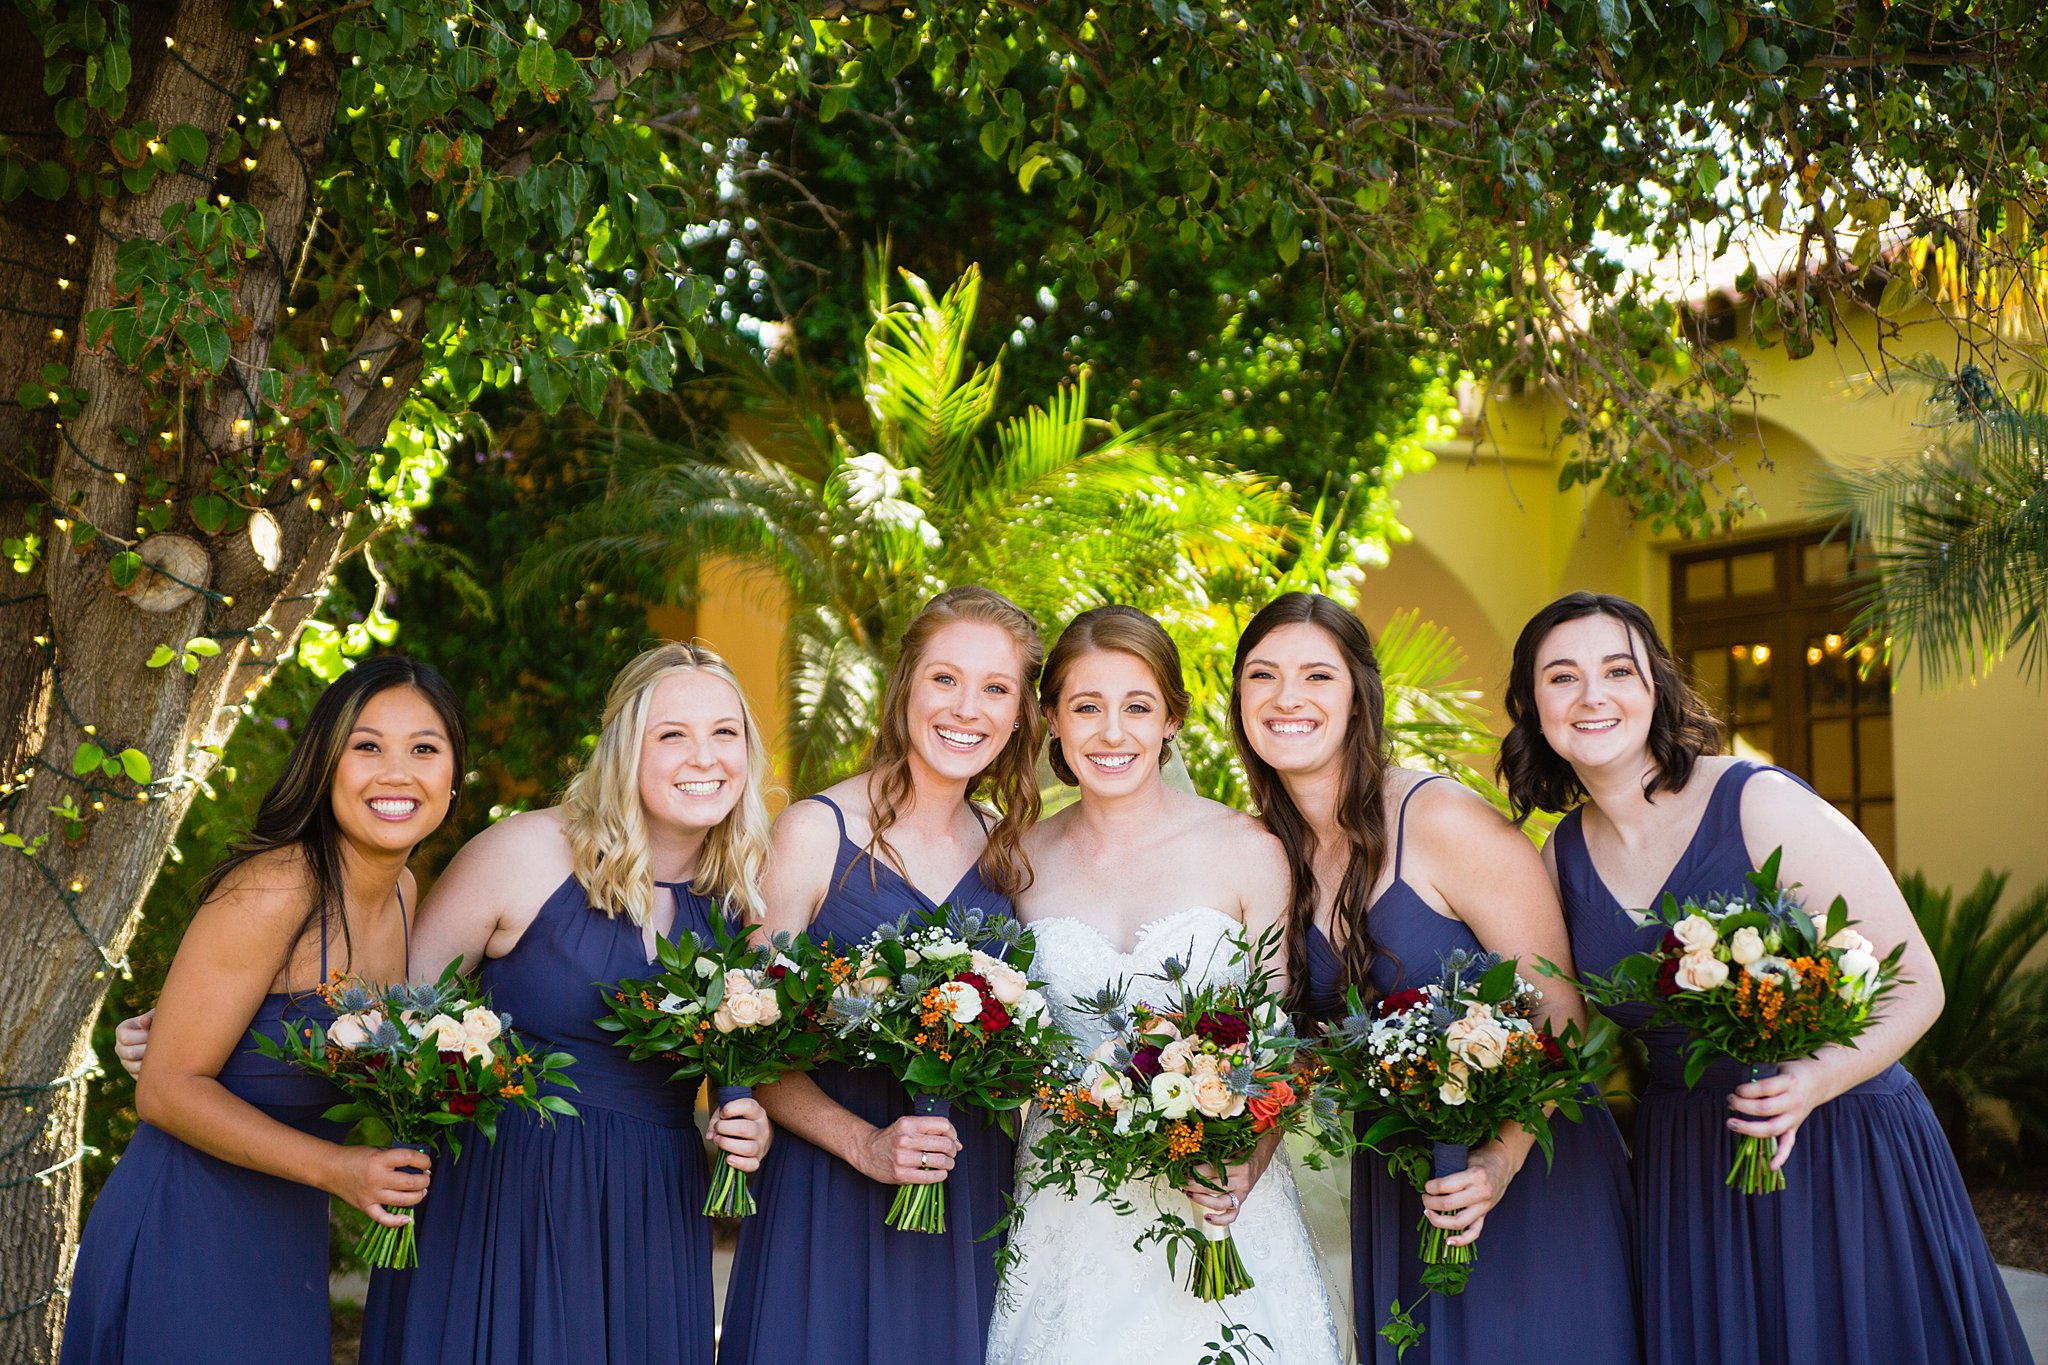 Bride and bridesmaids together at a Secret Garden Events wedding by Arizona wedding photographer PMA Photography.